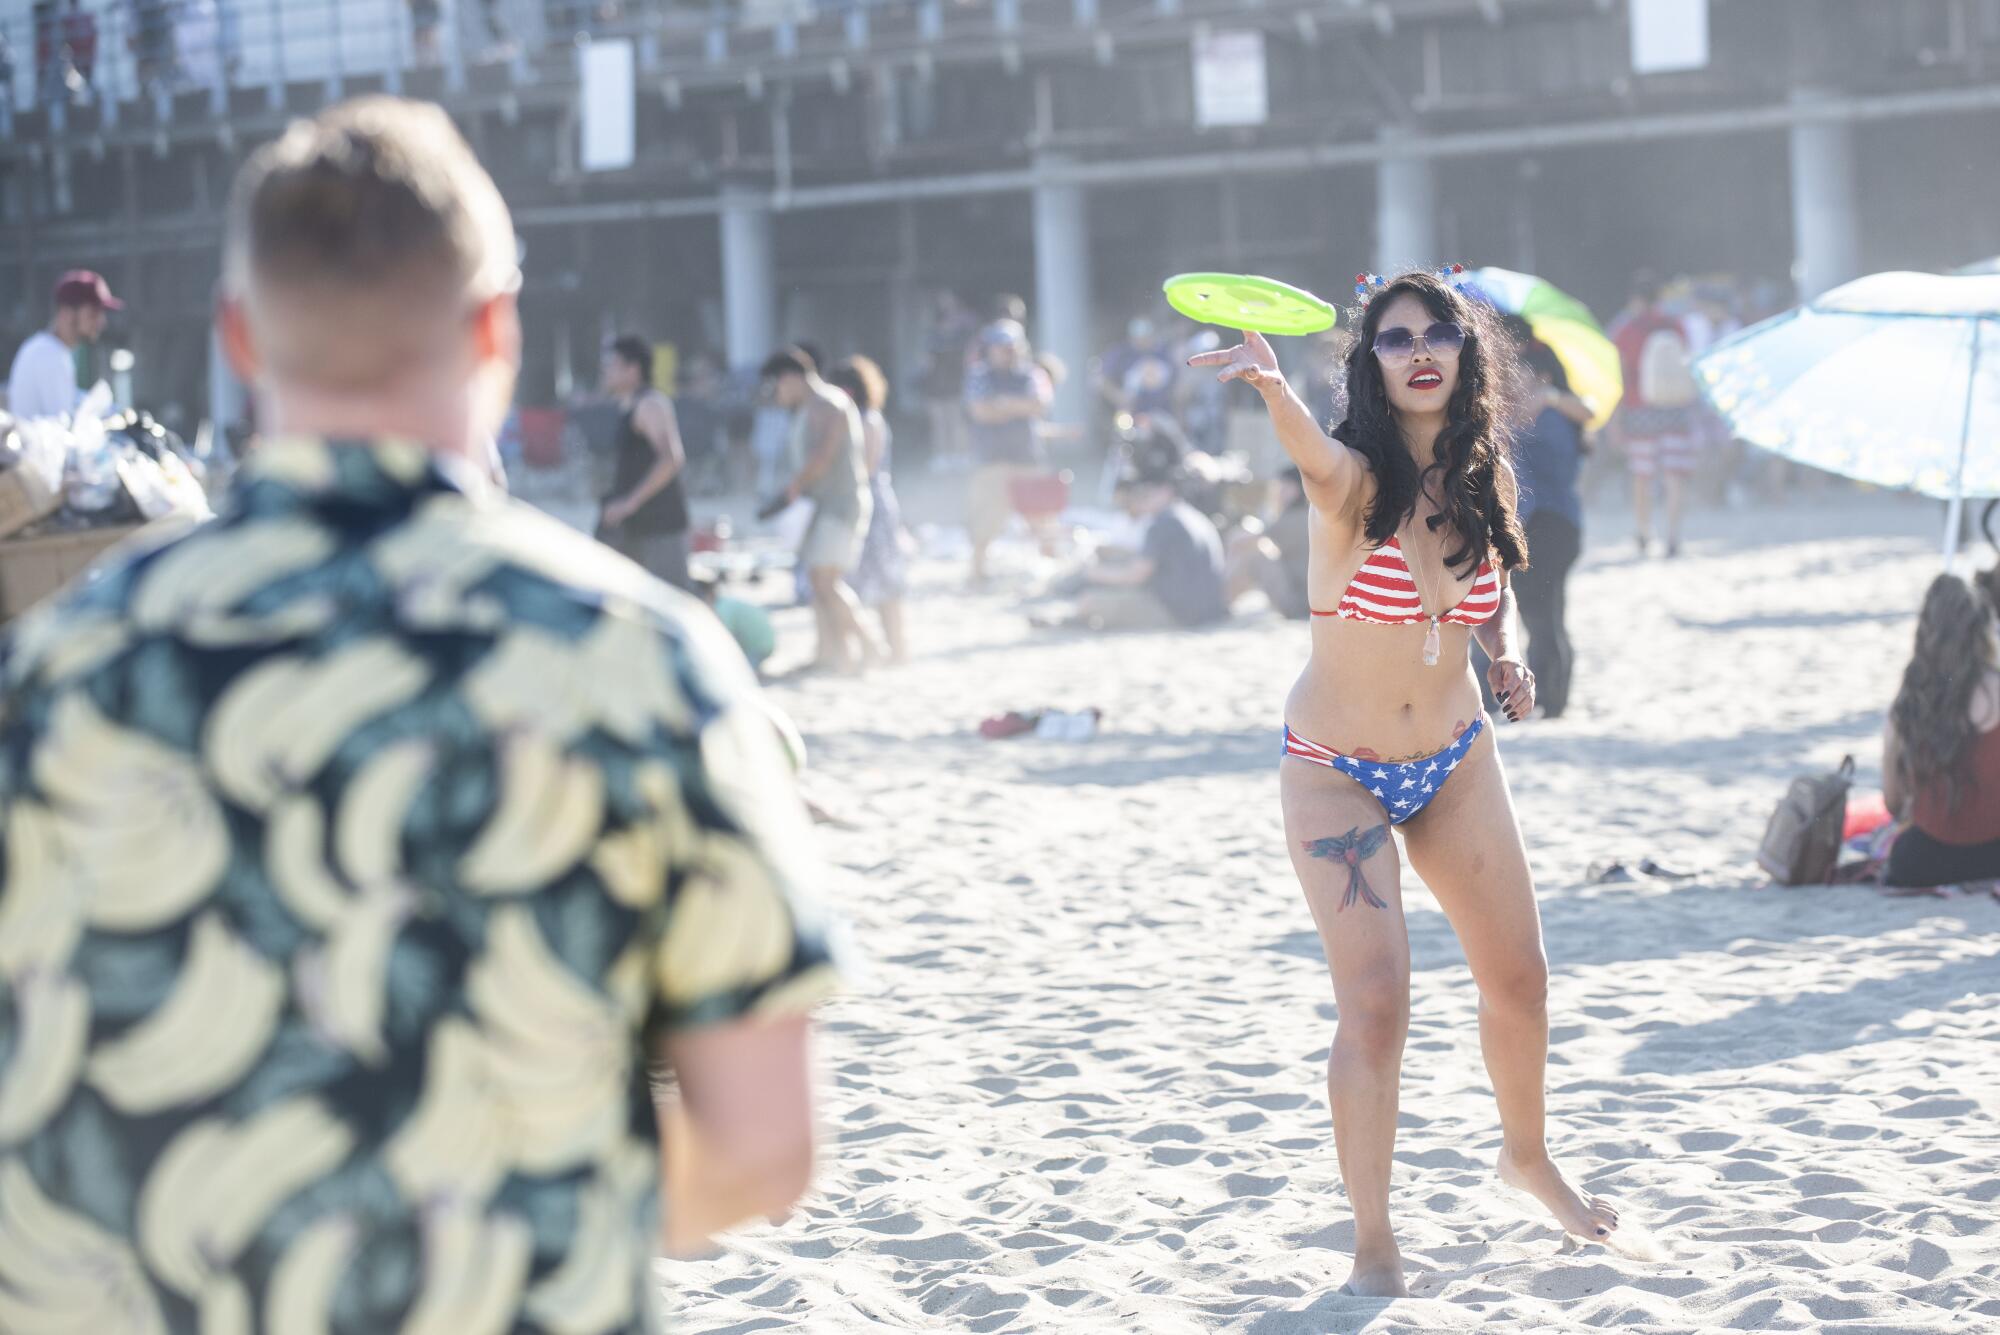 A woman in a red, white and blue bikini throws a green frisbee to a man in a colorful shirt on the beach